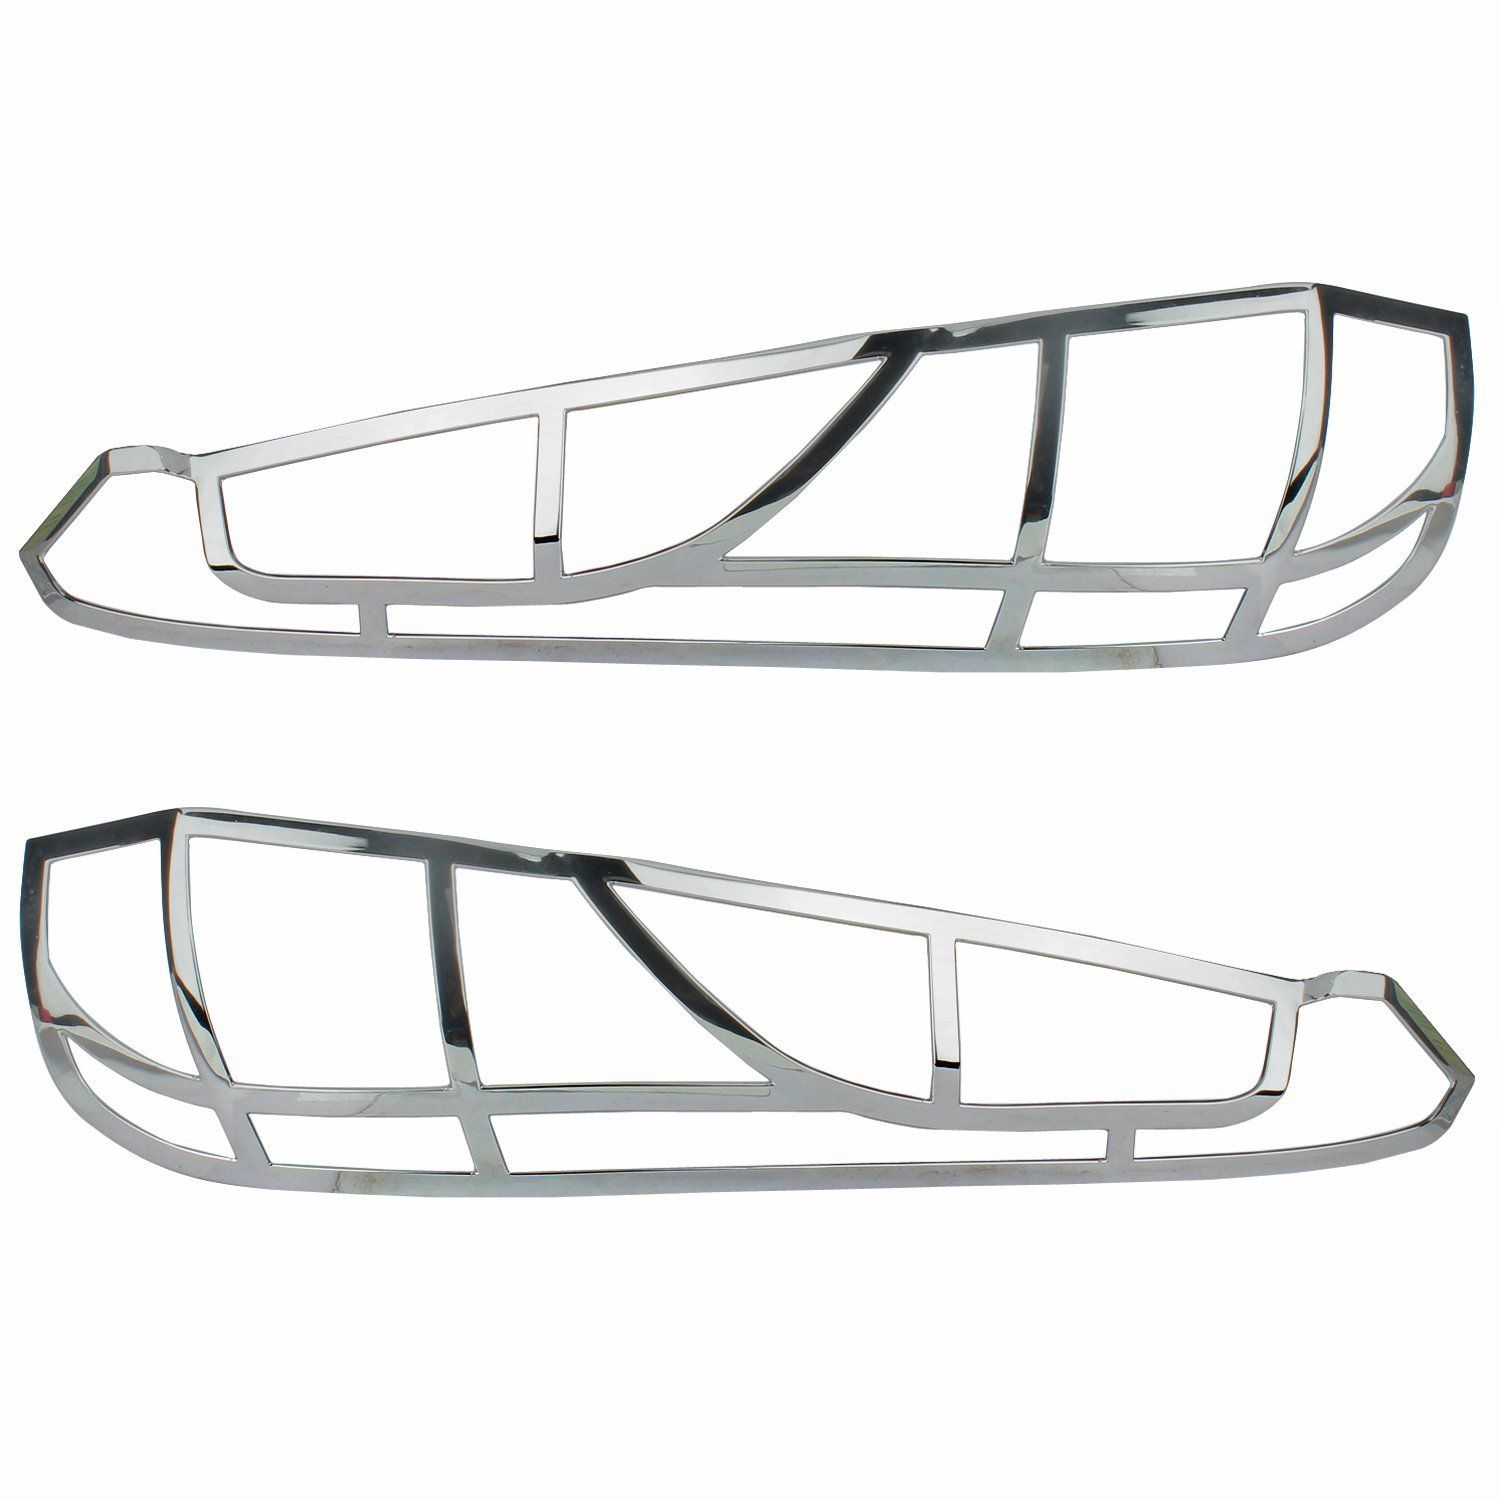 TAIL LAMP MOULDINGS FOR FORD FIGO (SET OF 2PCS)